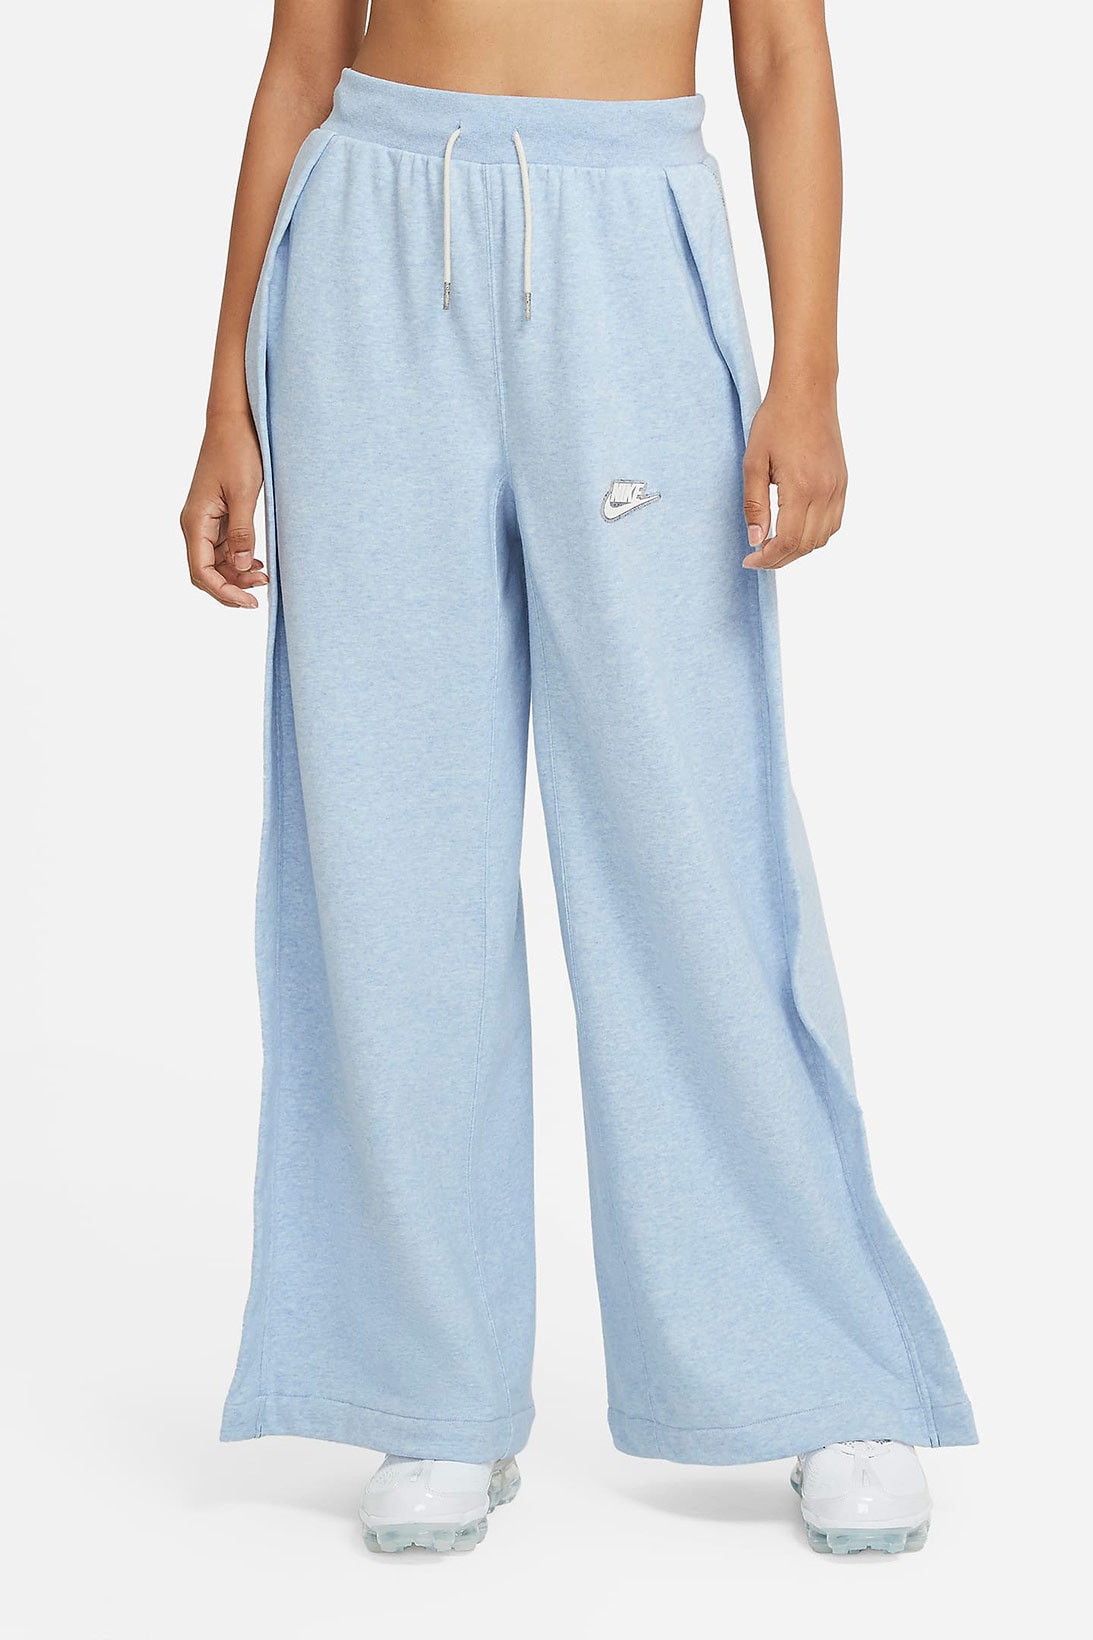 nike sportswear womens french terry trousers wide leg sweatpants sustainable light armoury blue front